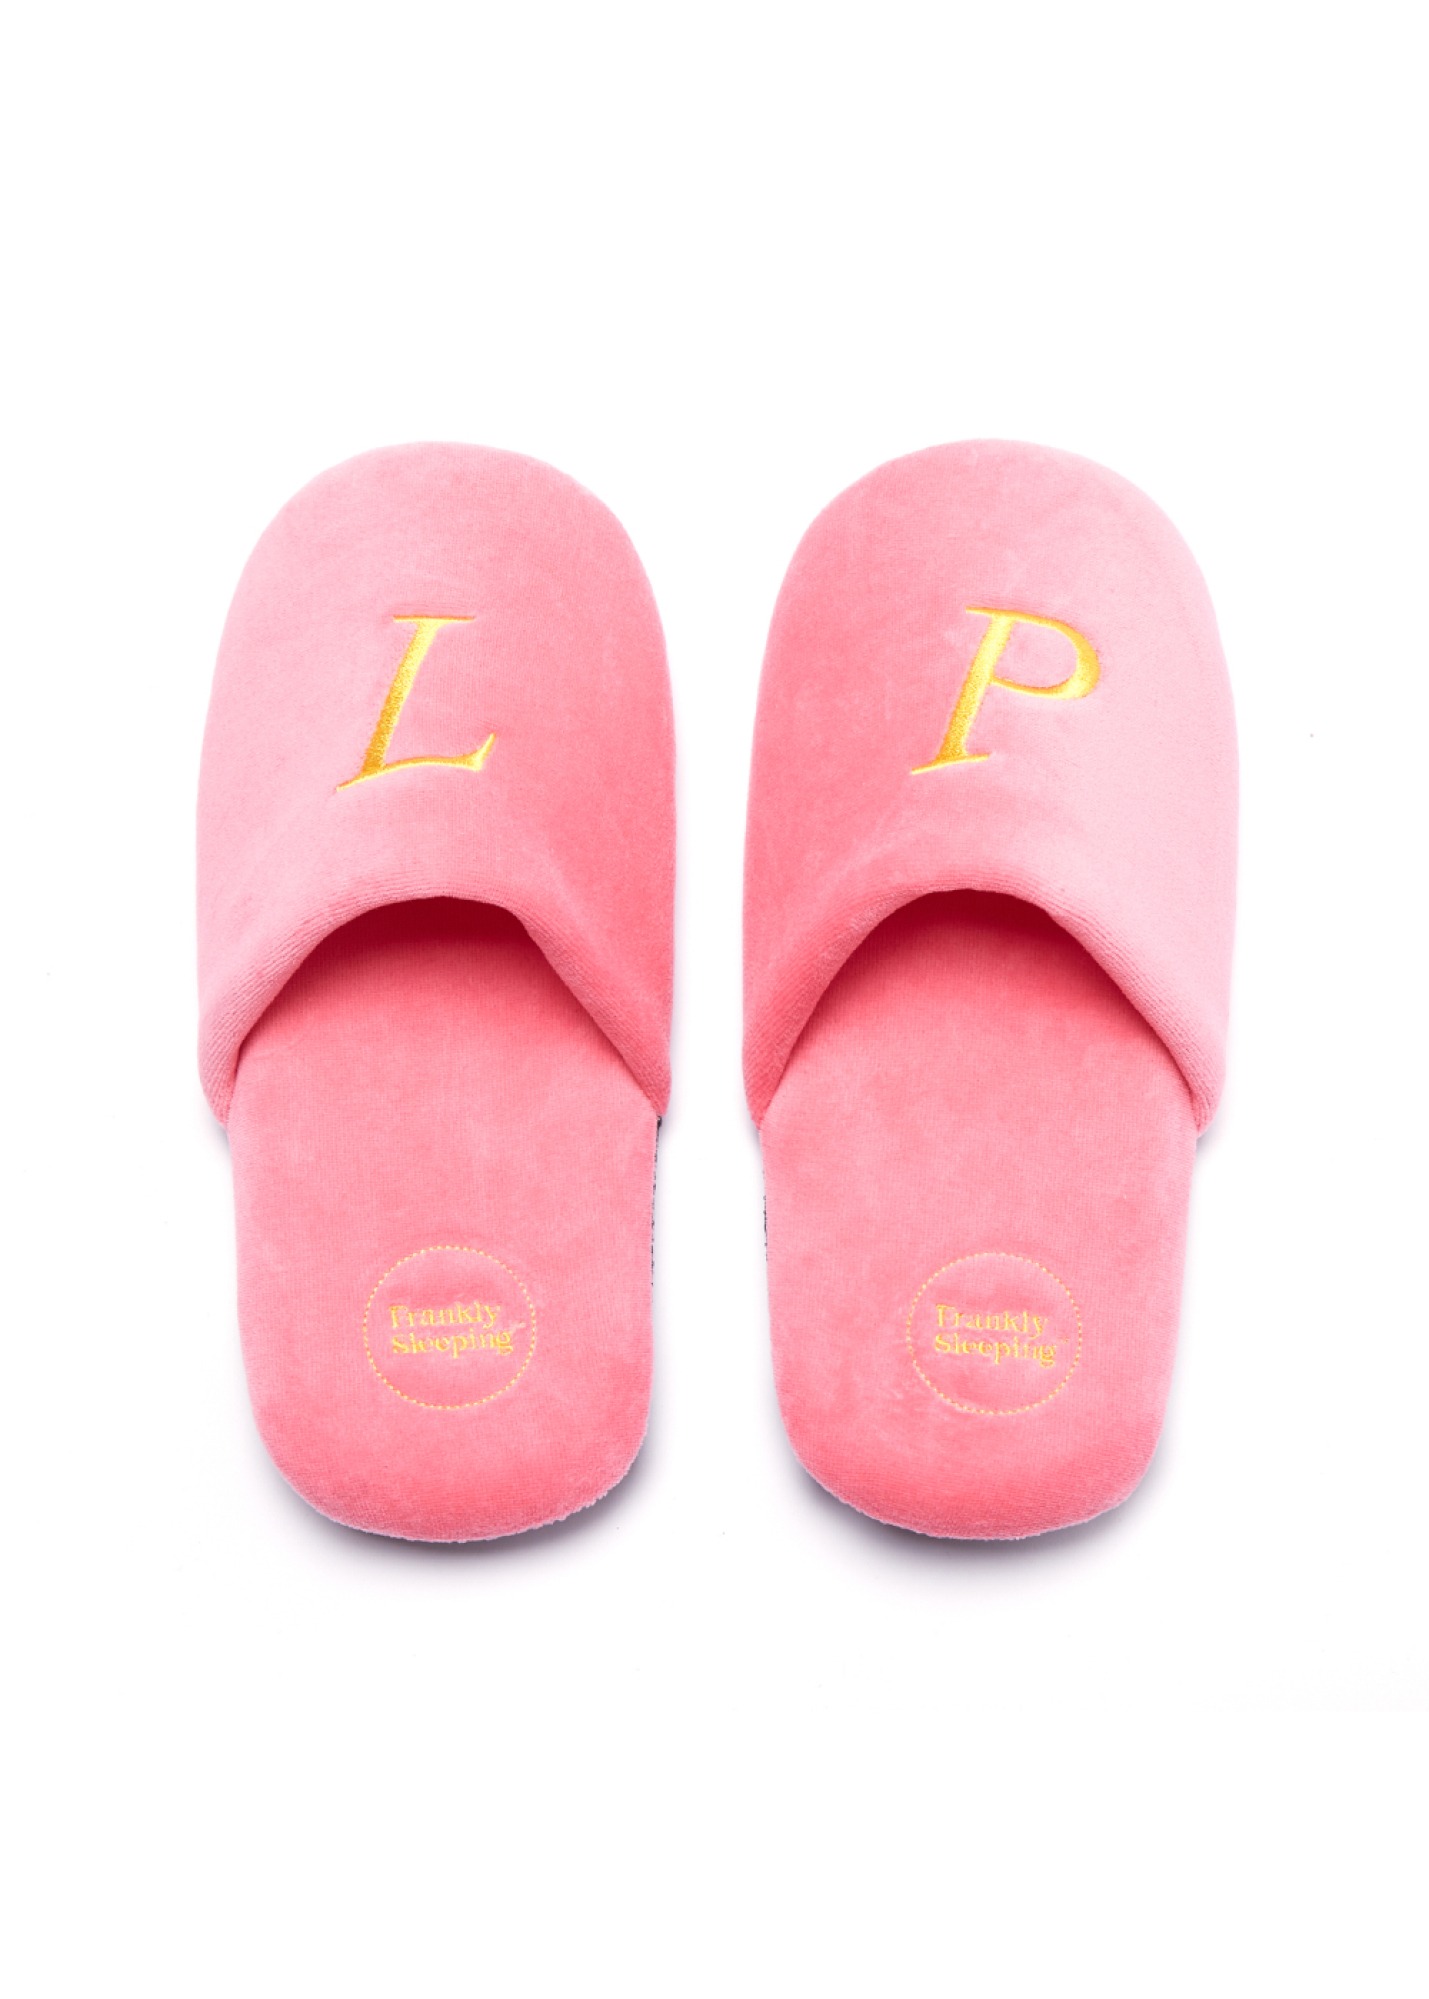 Washable Home Office Shoes, Pink,FRANKLY